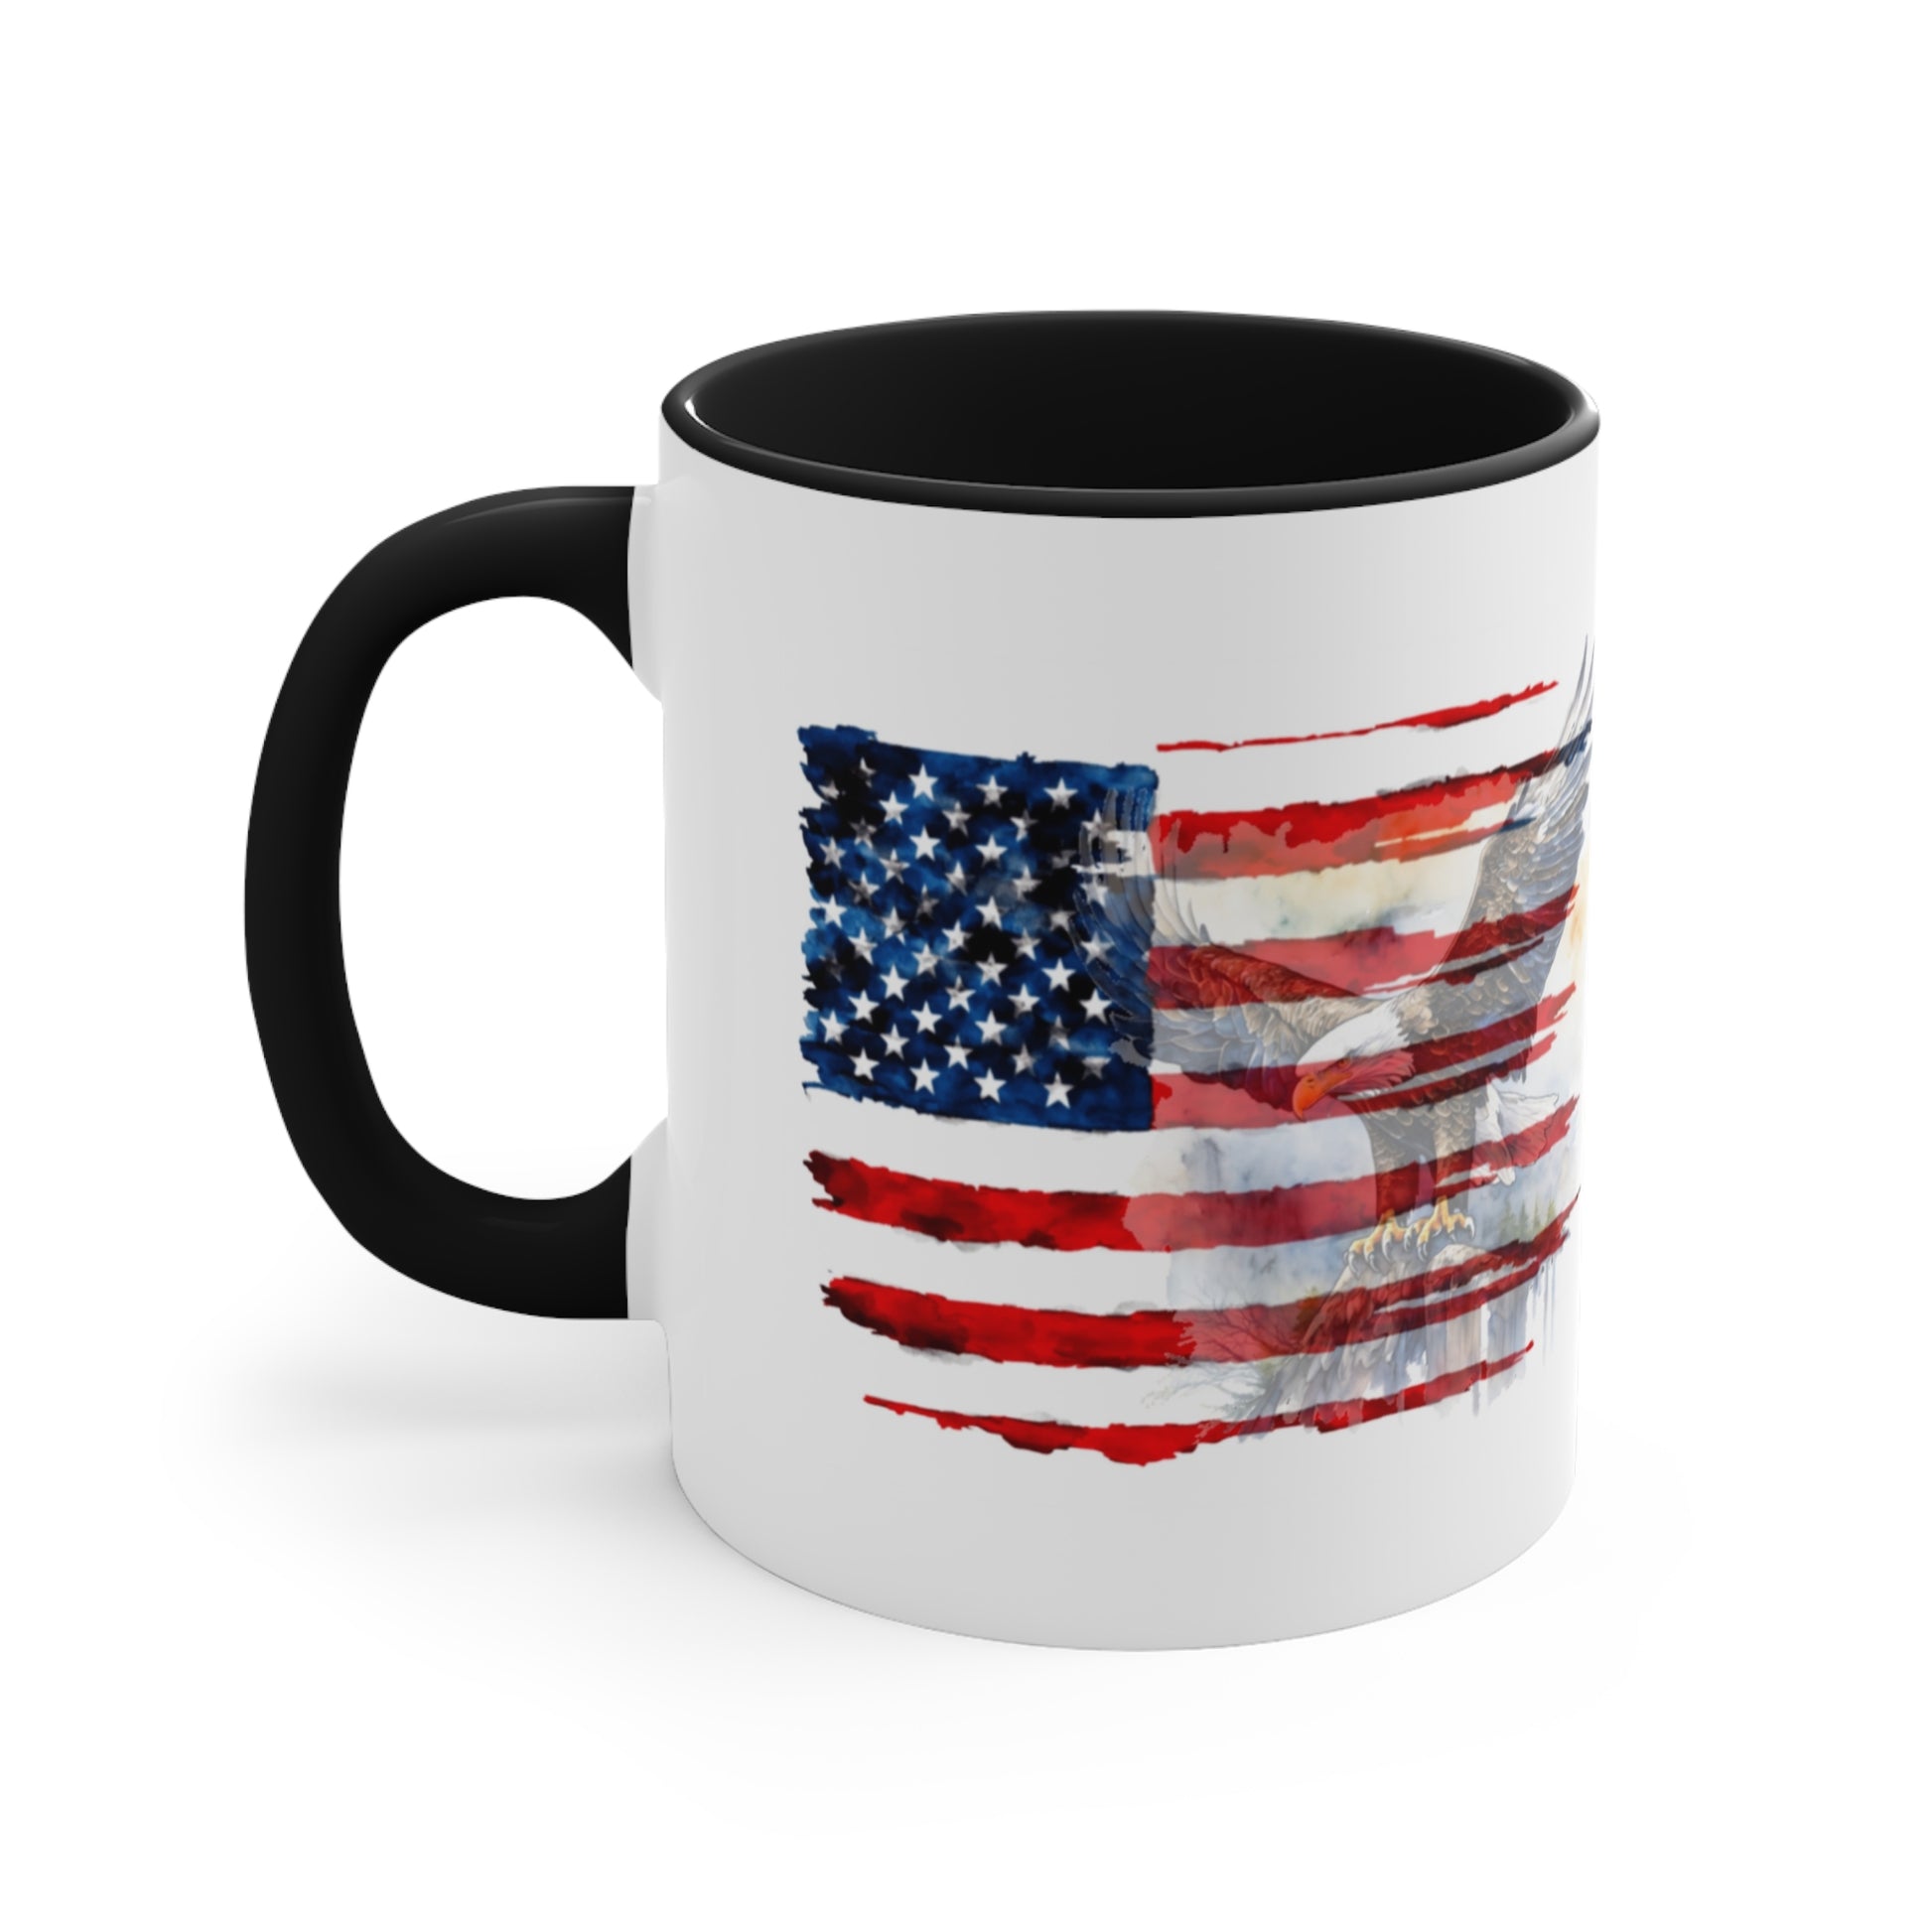 Coffee Mug with US Flag and eagle 11 oz, back view in black.